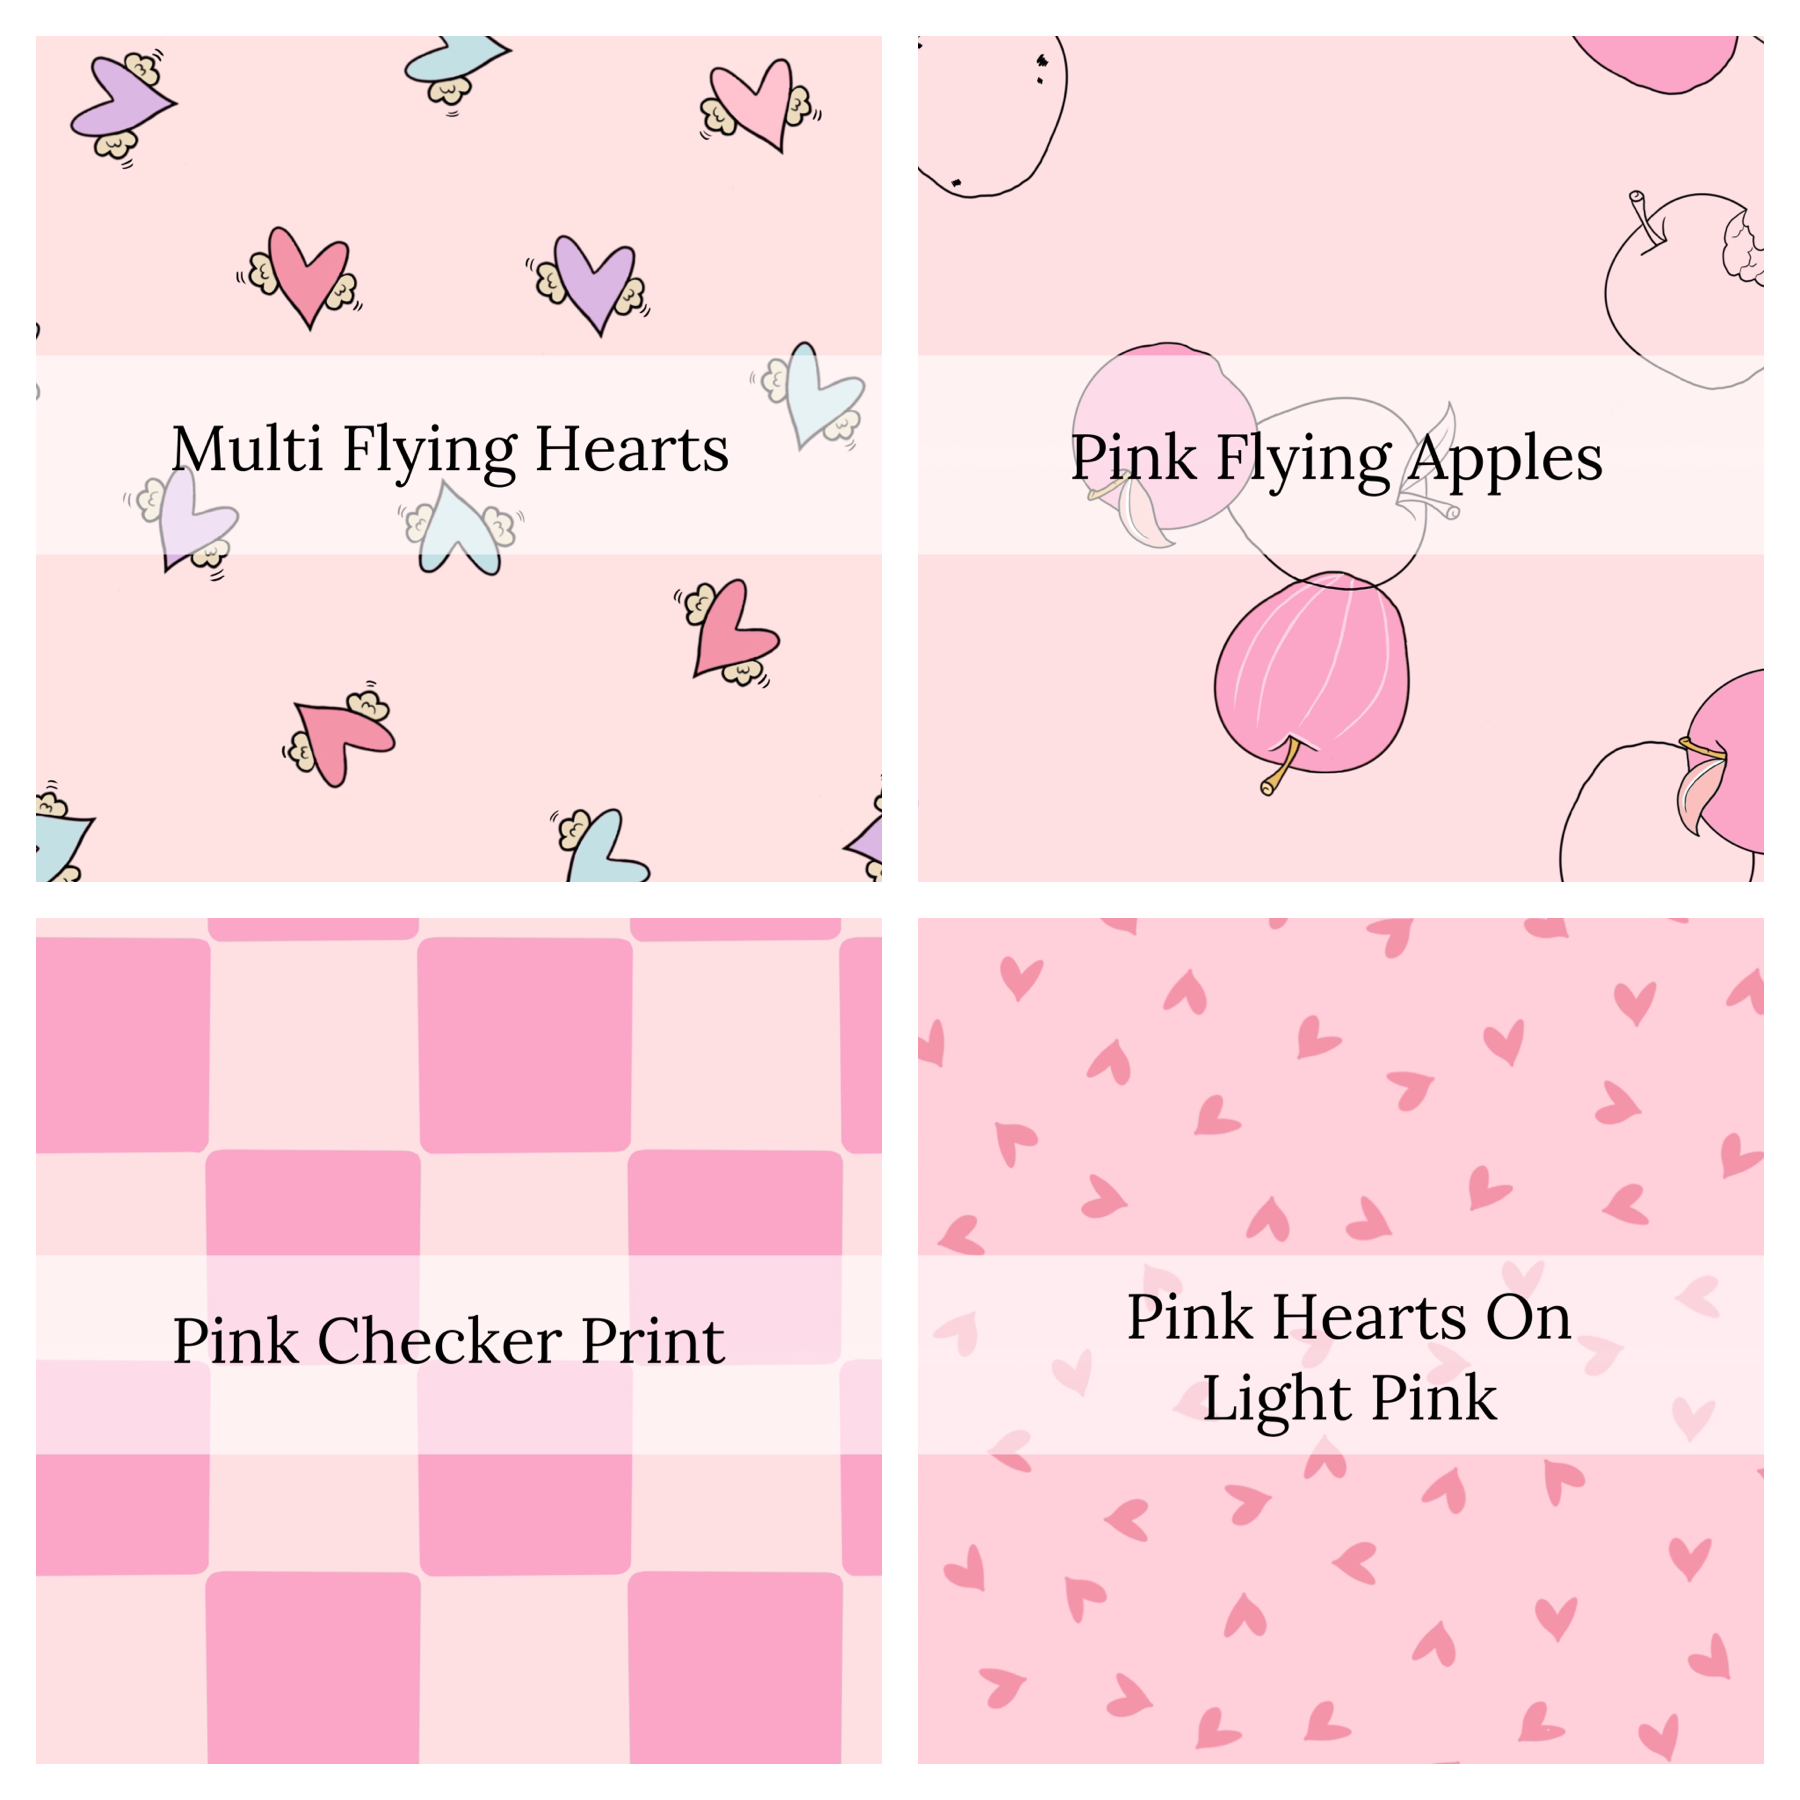 Pink high quality fabric adaptable for all your crafting needs. Make cute baby headwraps, fun girl hairbows, knotted headbands for adults or kids, clothing, and more! 